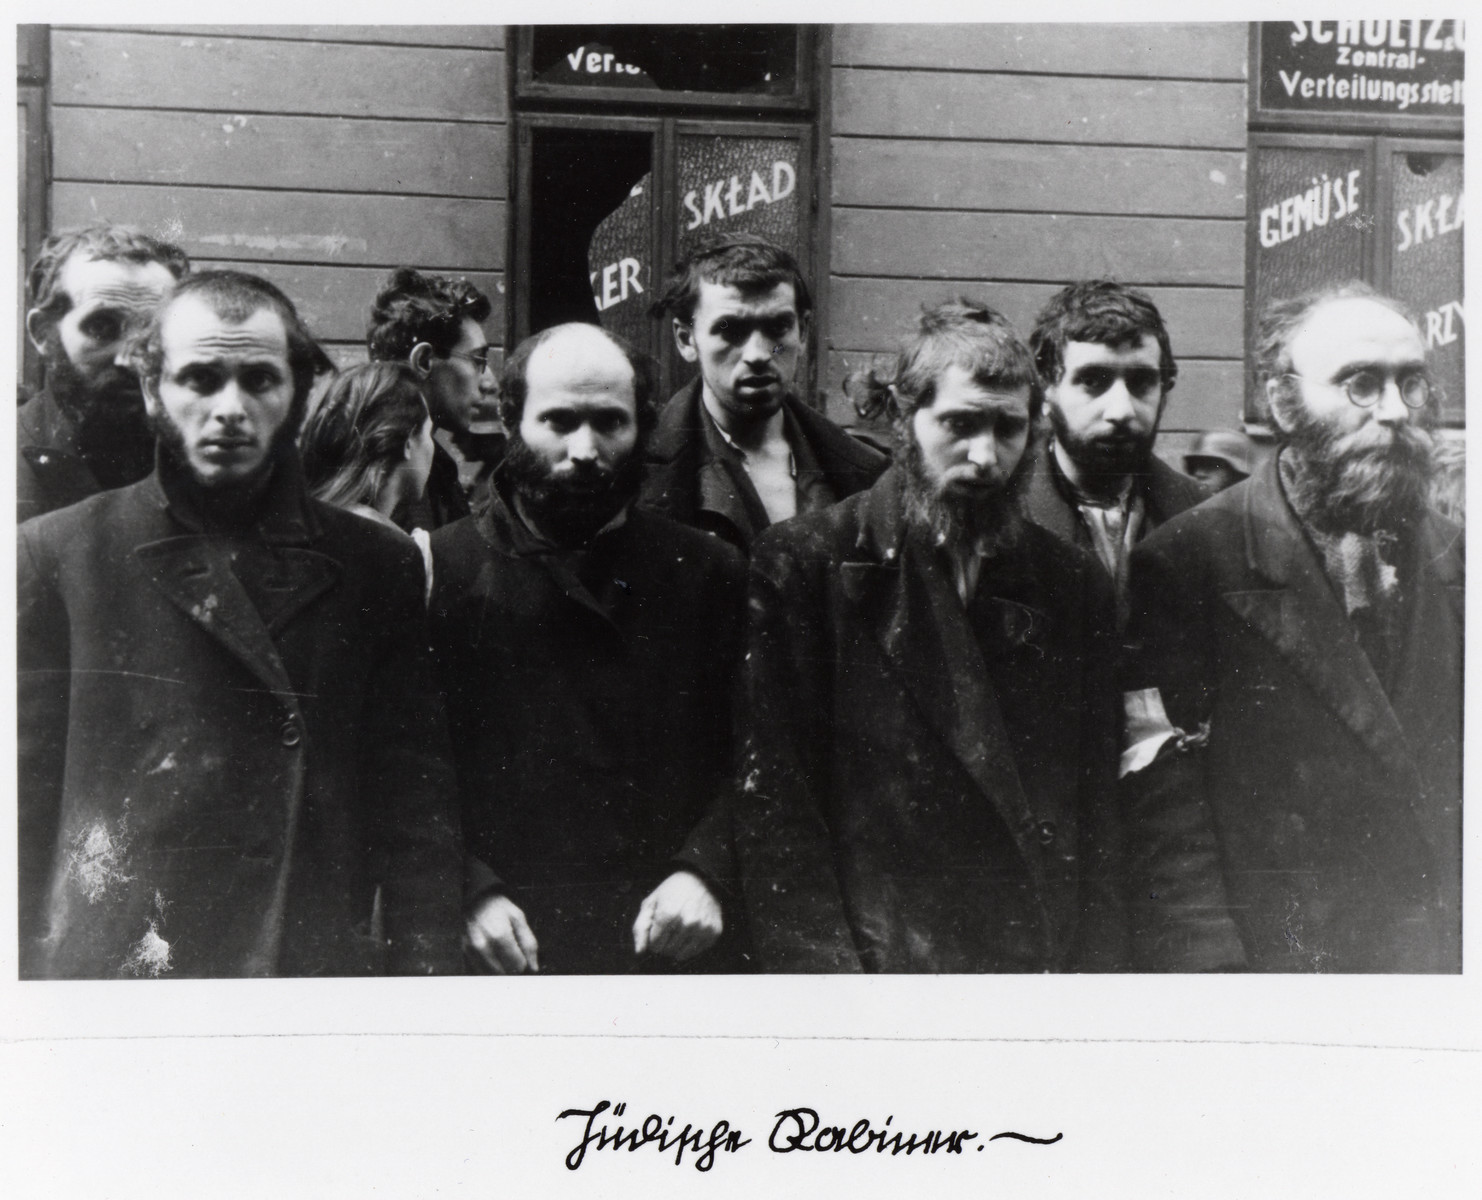 Religious Jews captured by the SS during the Warsaw ghetto uprising.  The original German caption reads: "Jewish rabbis."